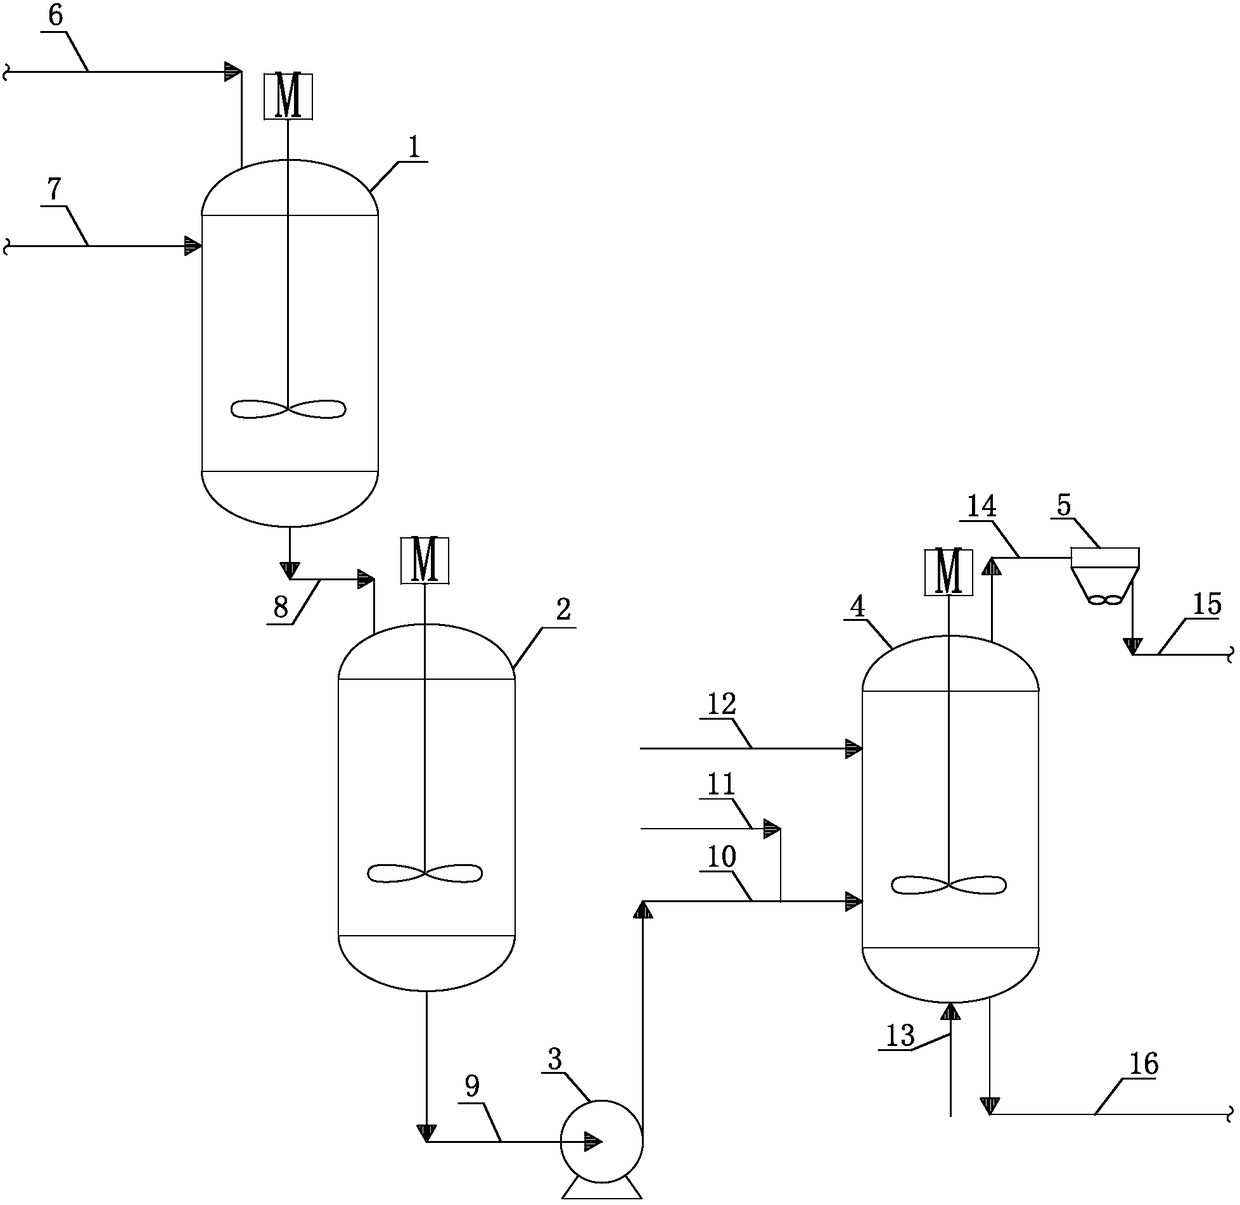 Steam stripping agent system for removing solvent in halogenated butyl rubber